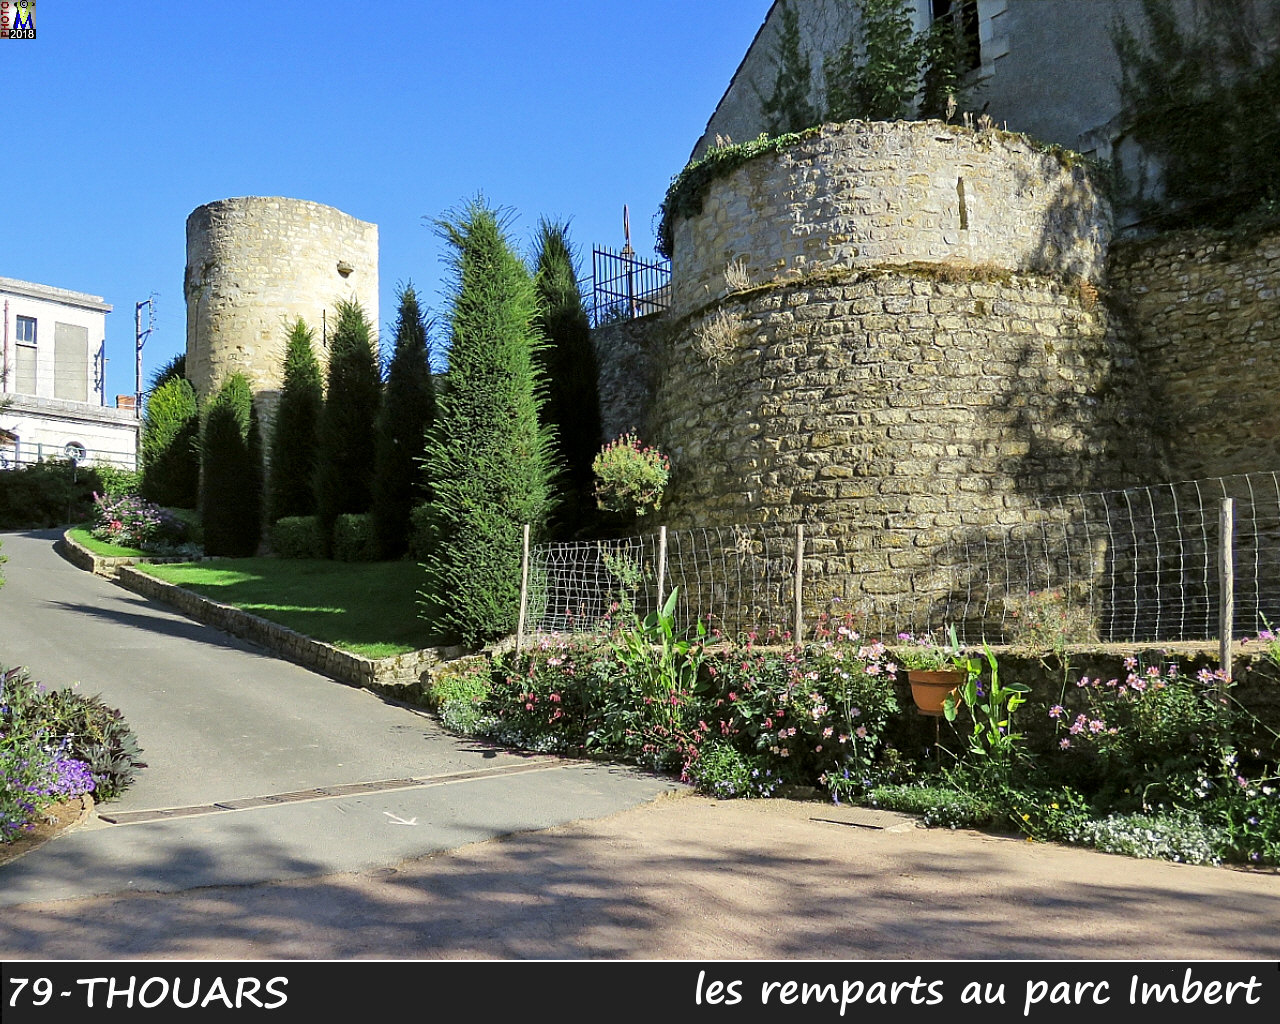 79THOUARS_remparts_1000.jpg